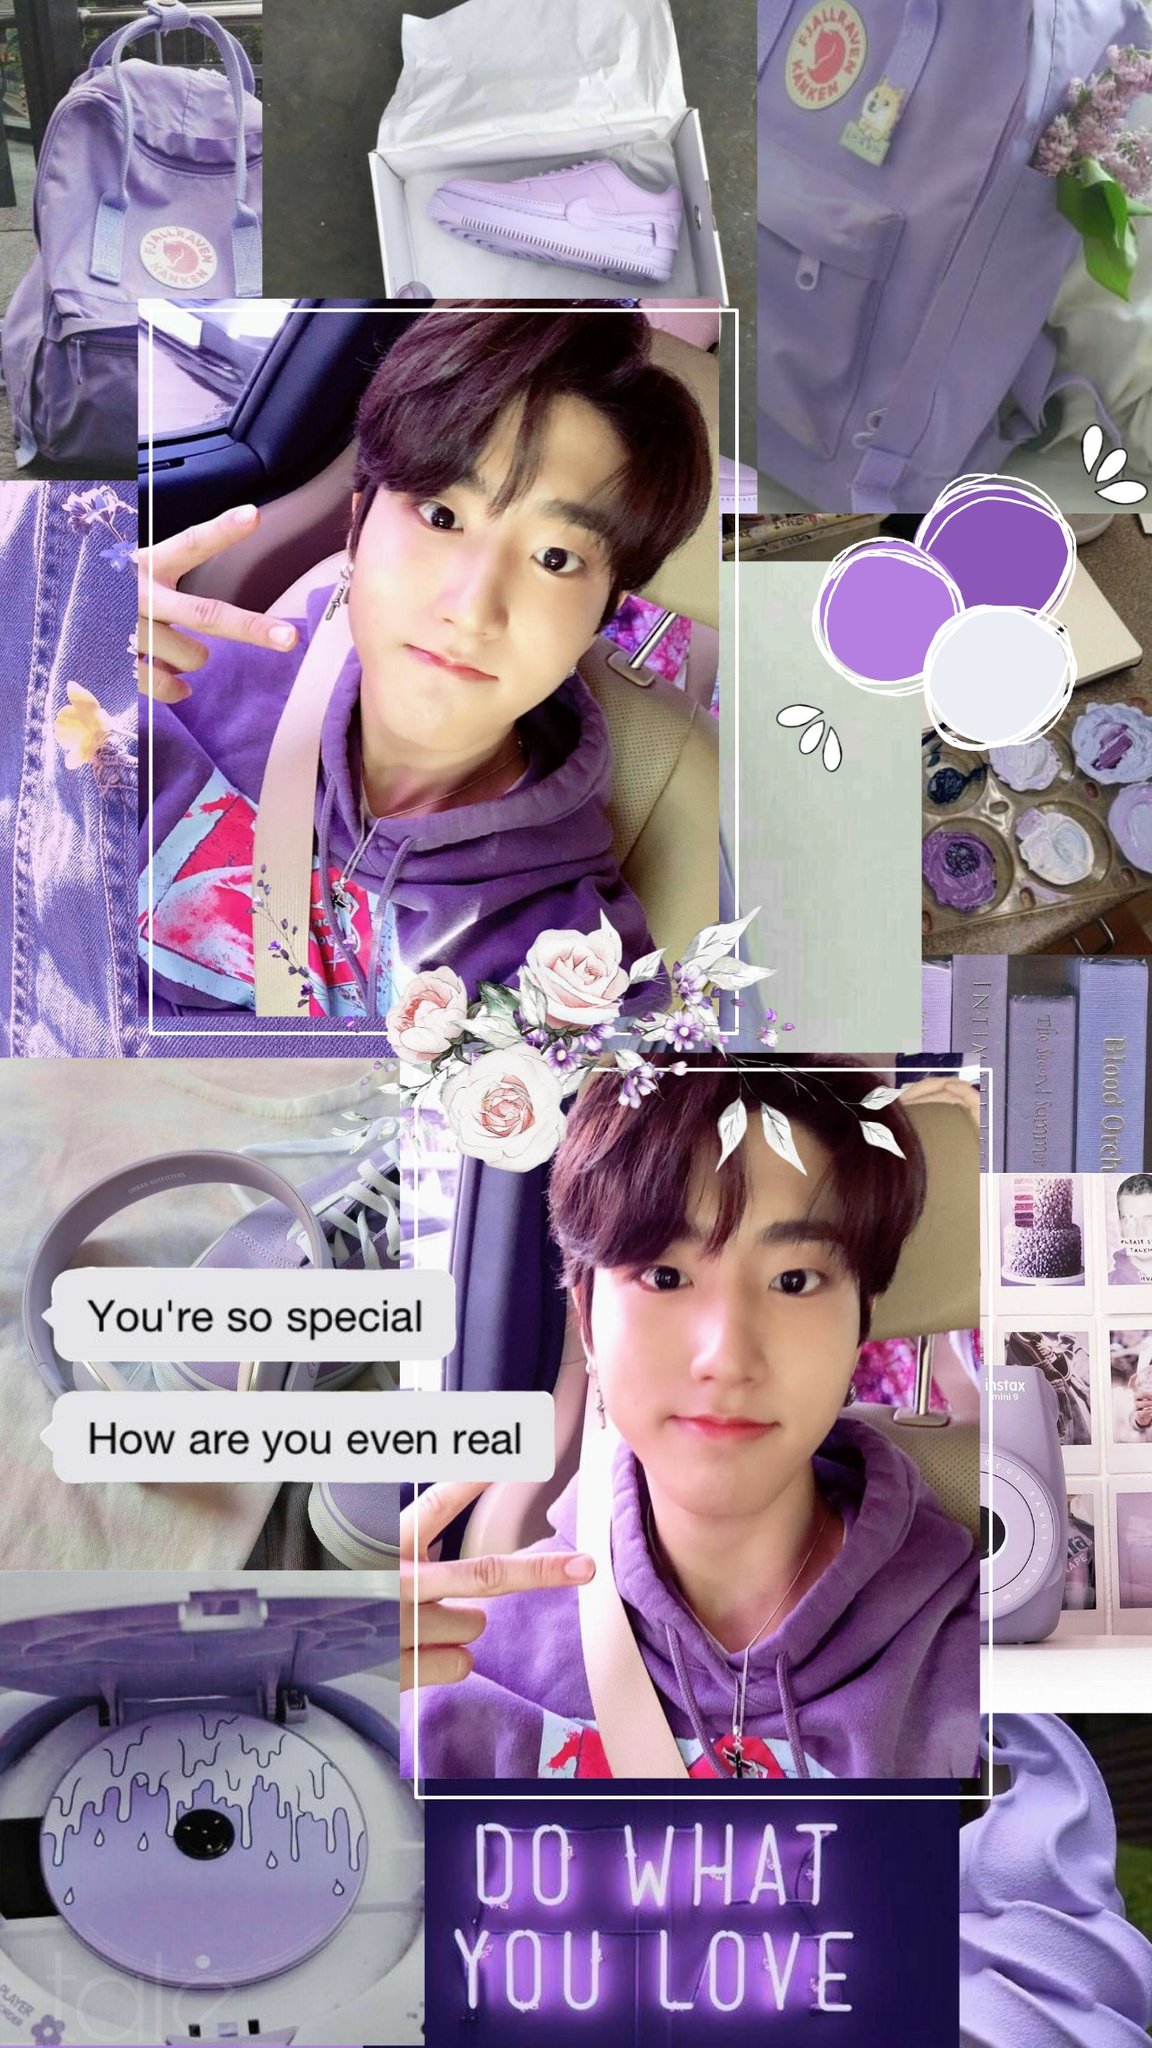 Your Fairy Tale - #aesthetic #kpop #collage_by_tale #wallpaper_by_tale #collage #wallpaper #StrayKids #Han #HappyHanDay #HanInAMillion